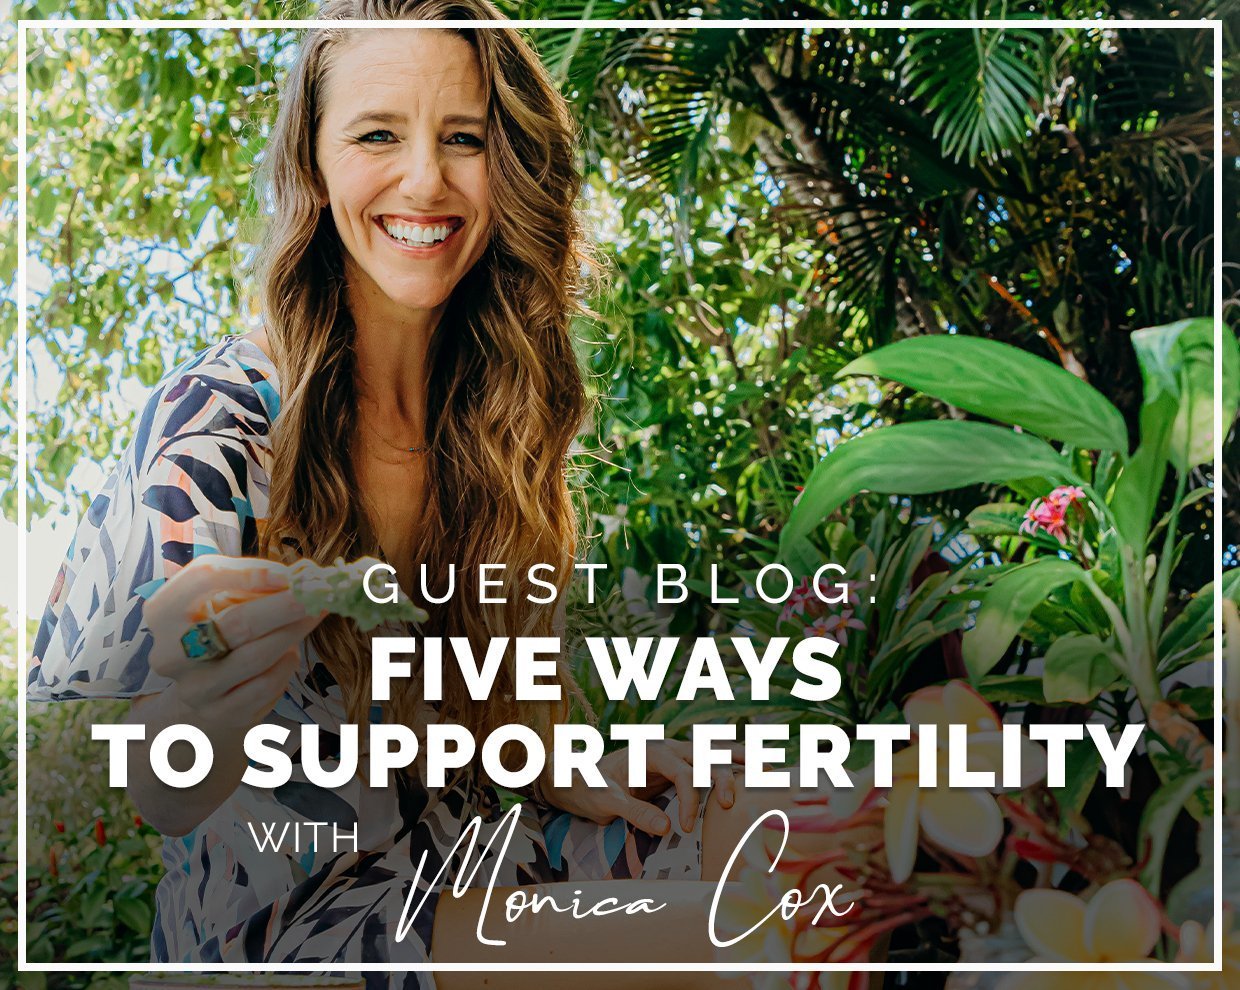 Functional health and women's fertility with Monica Cox